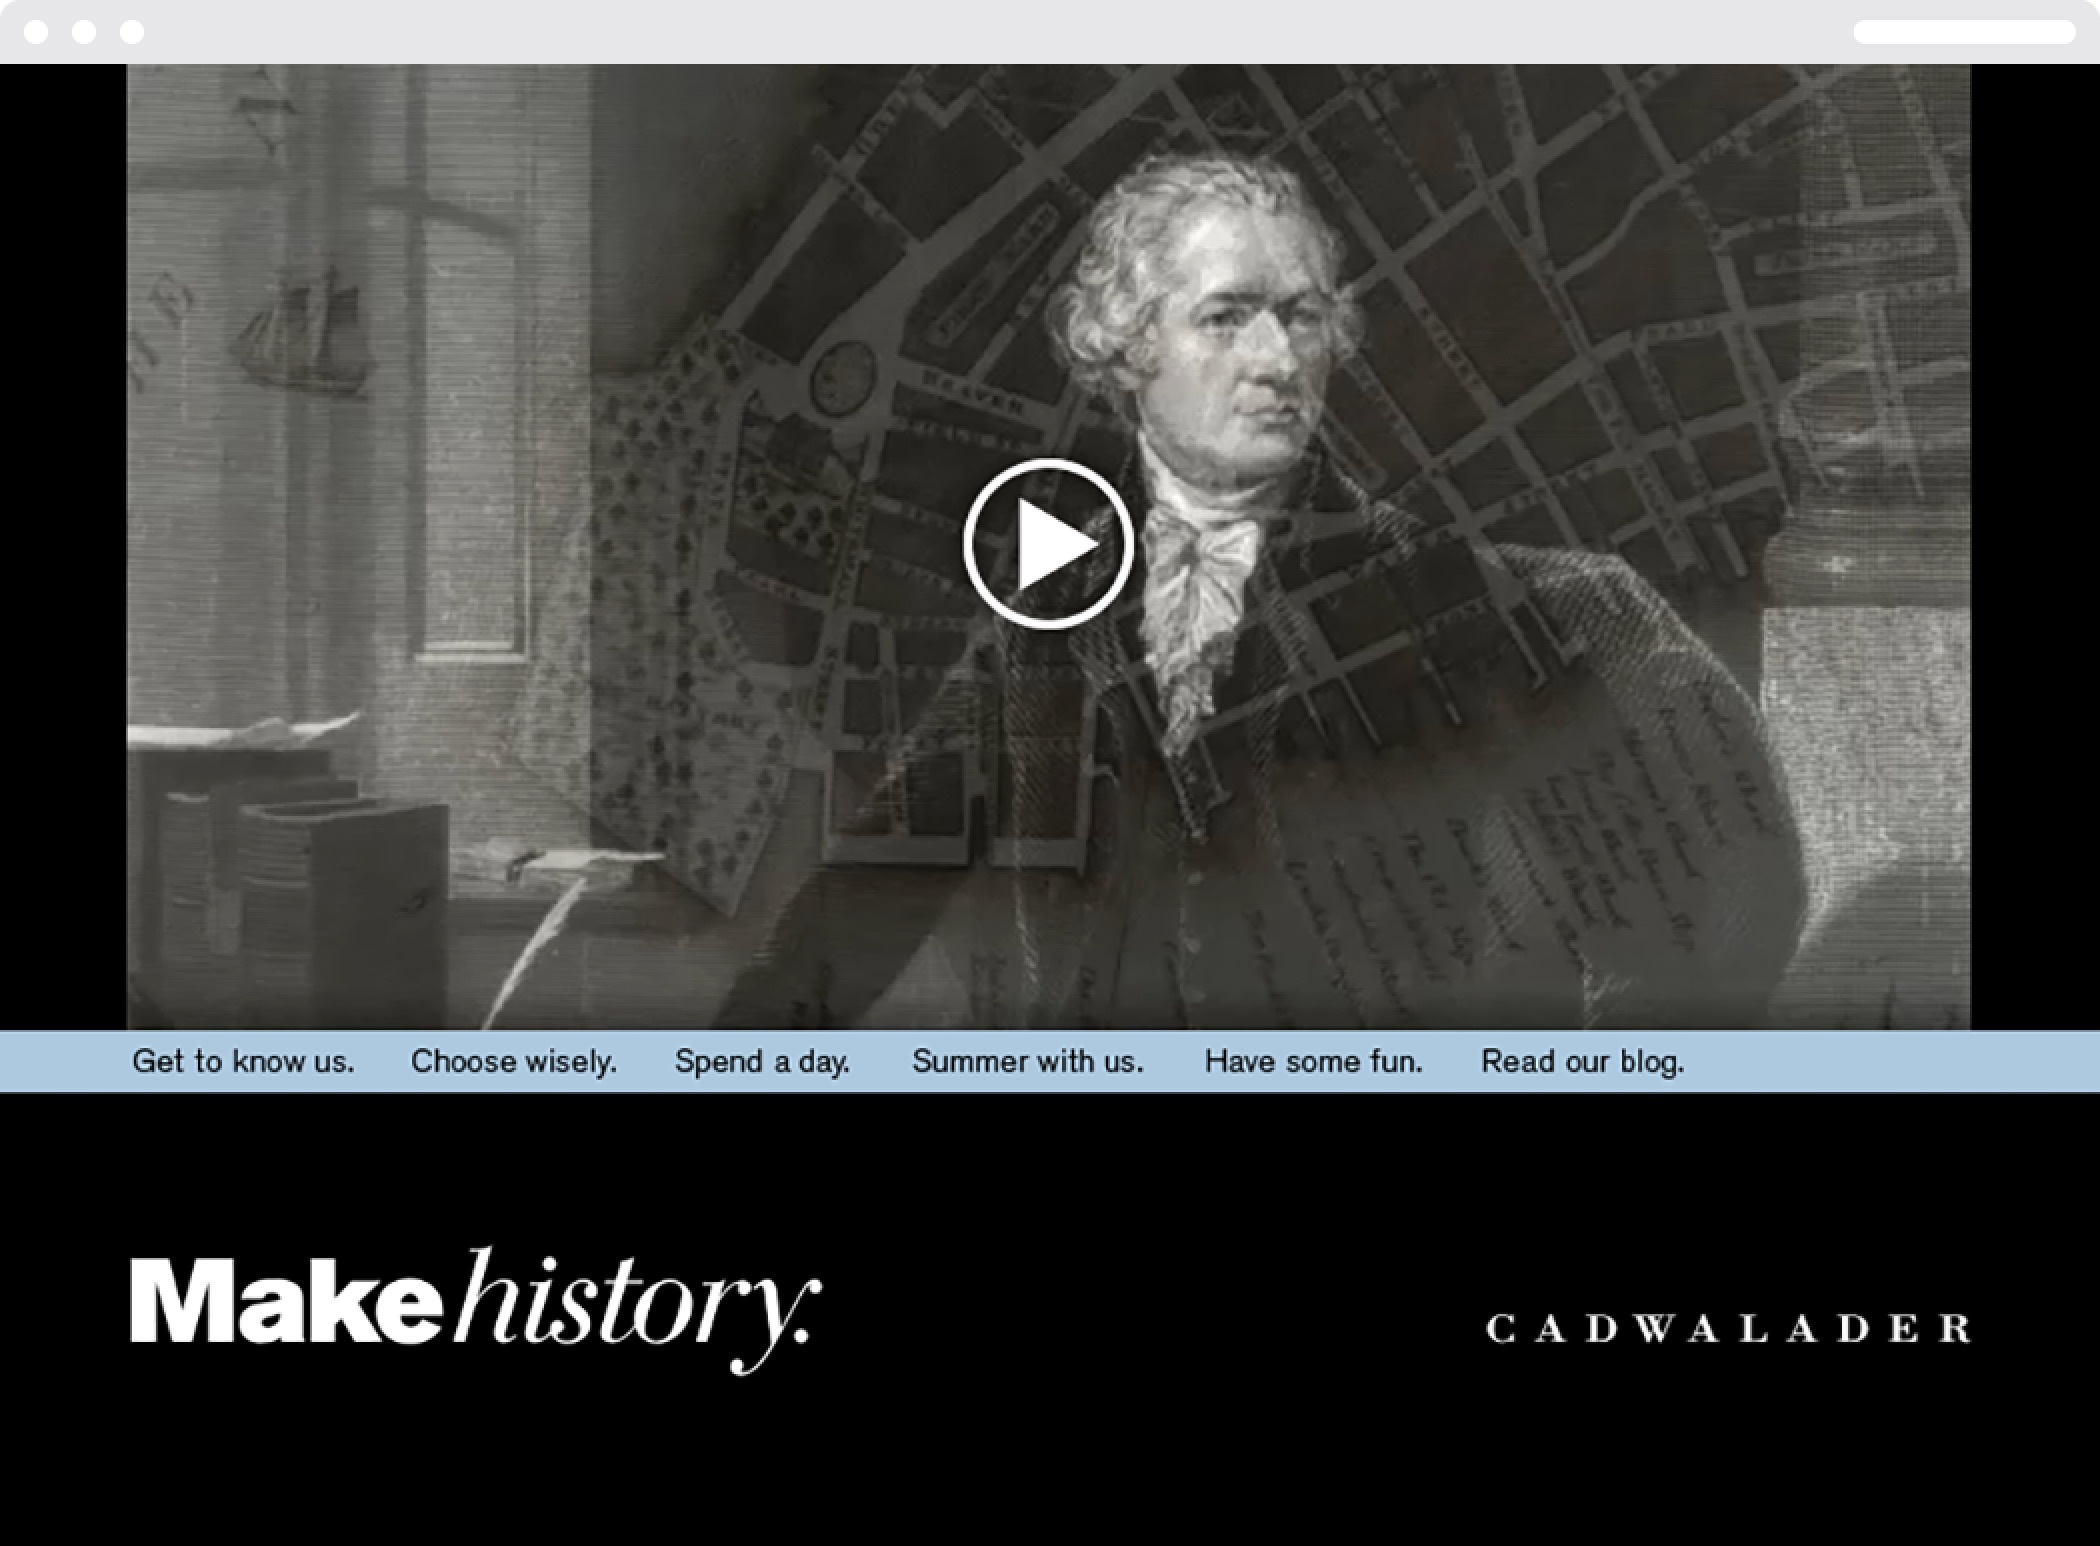 A portrait of Alexander Hamilton superimposed on a map of early New York on the Cadwalader website.